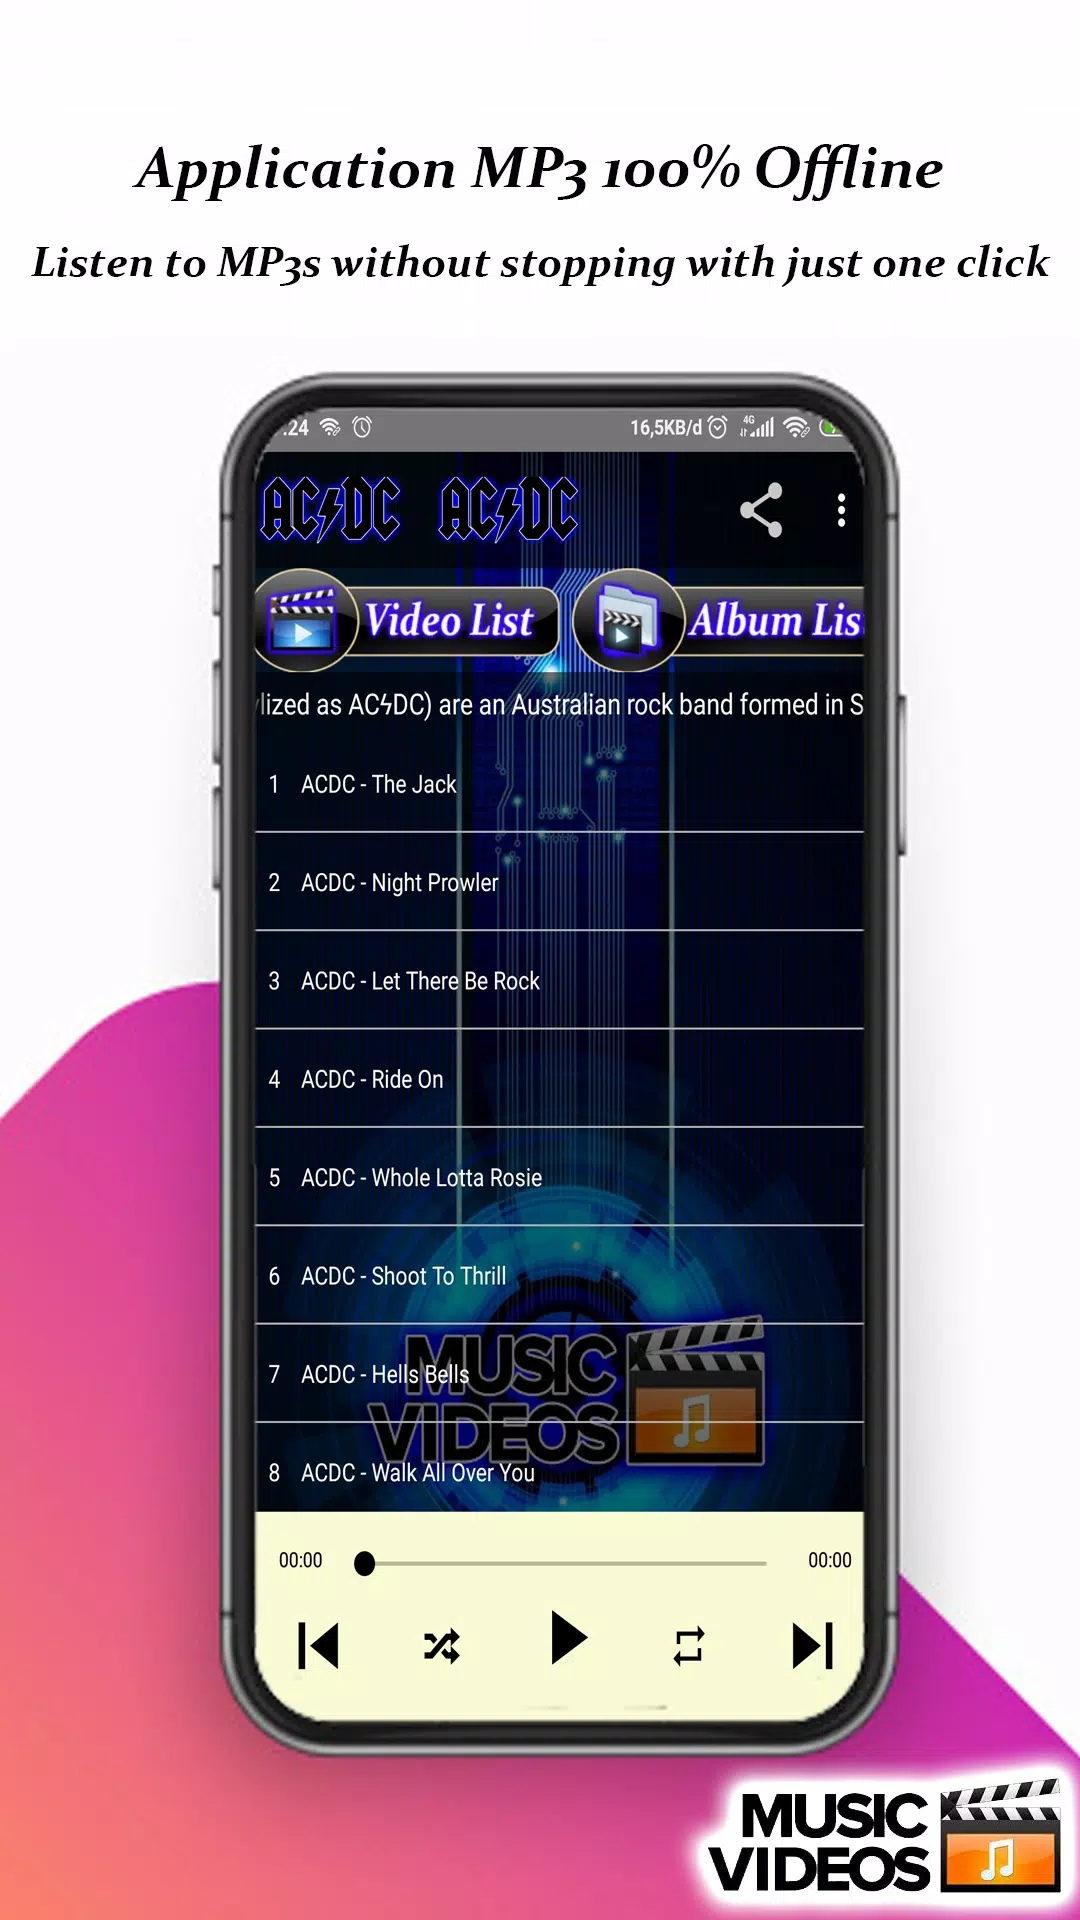 ACDC - Offline MP3 & Video Album Collection APK for Android Download